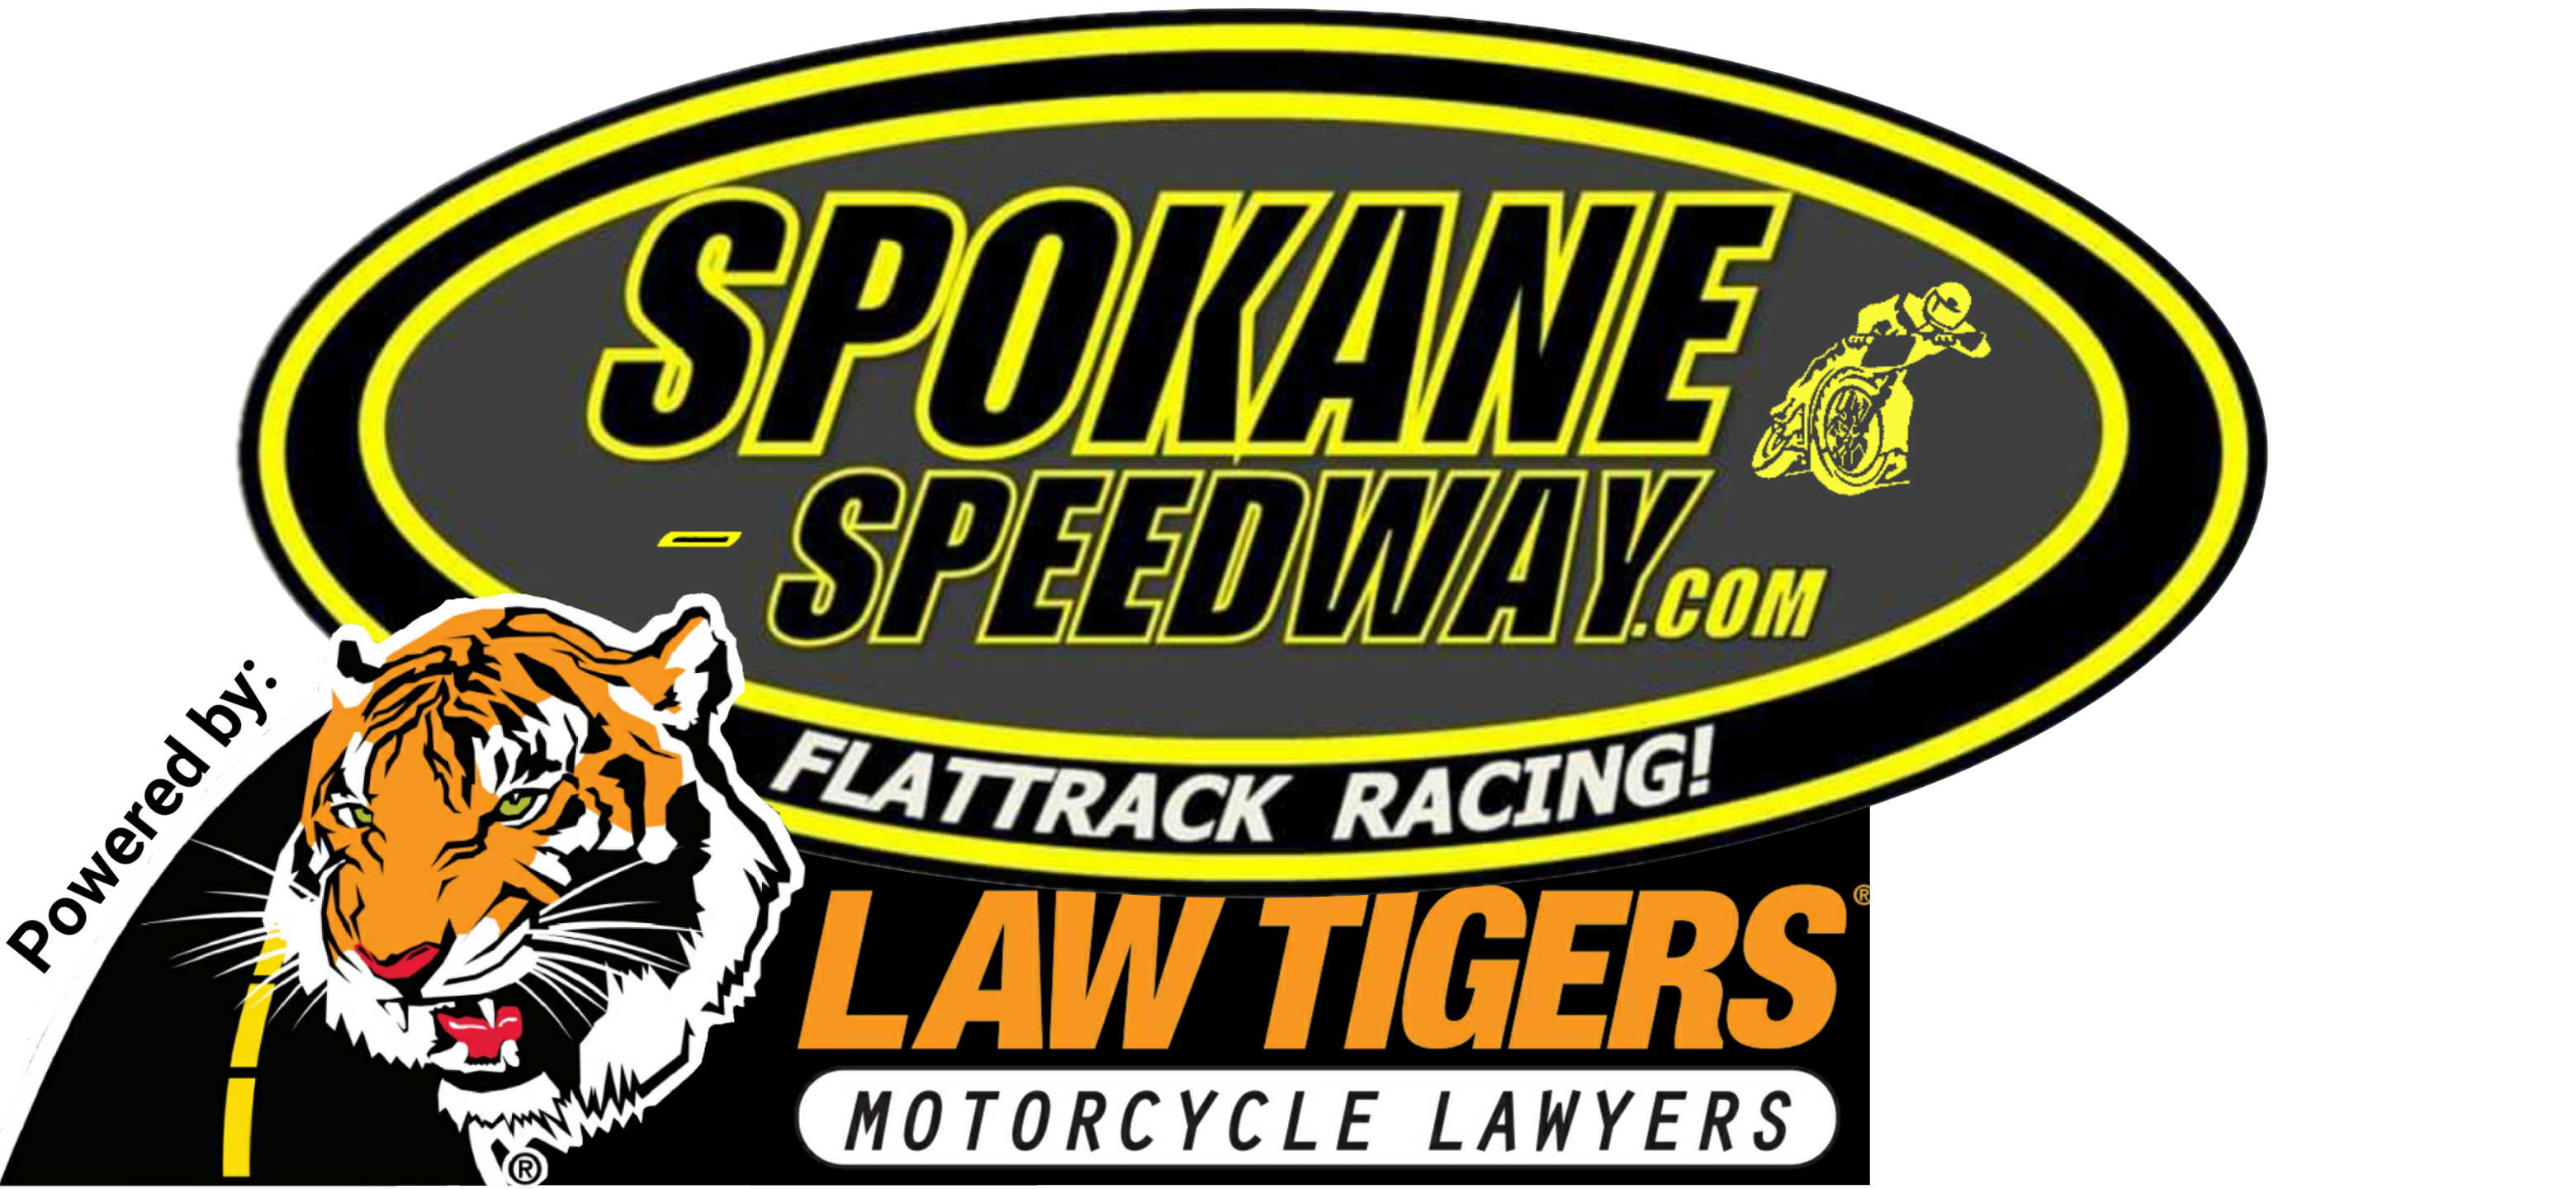 images/spokane-speedway.com-with-lawtigers.png